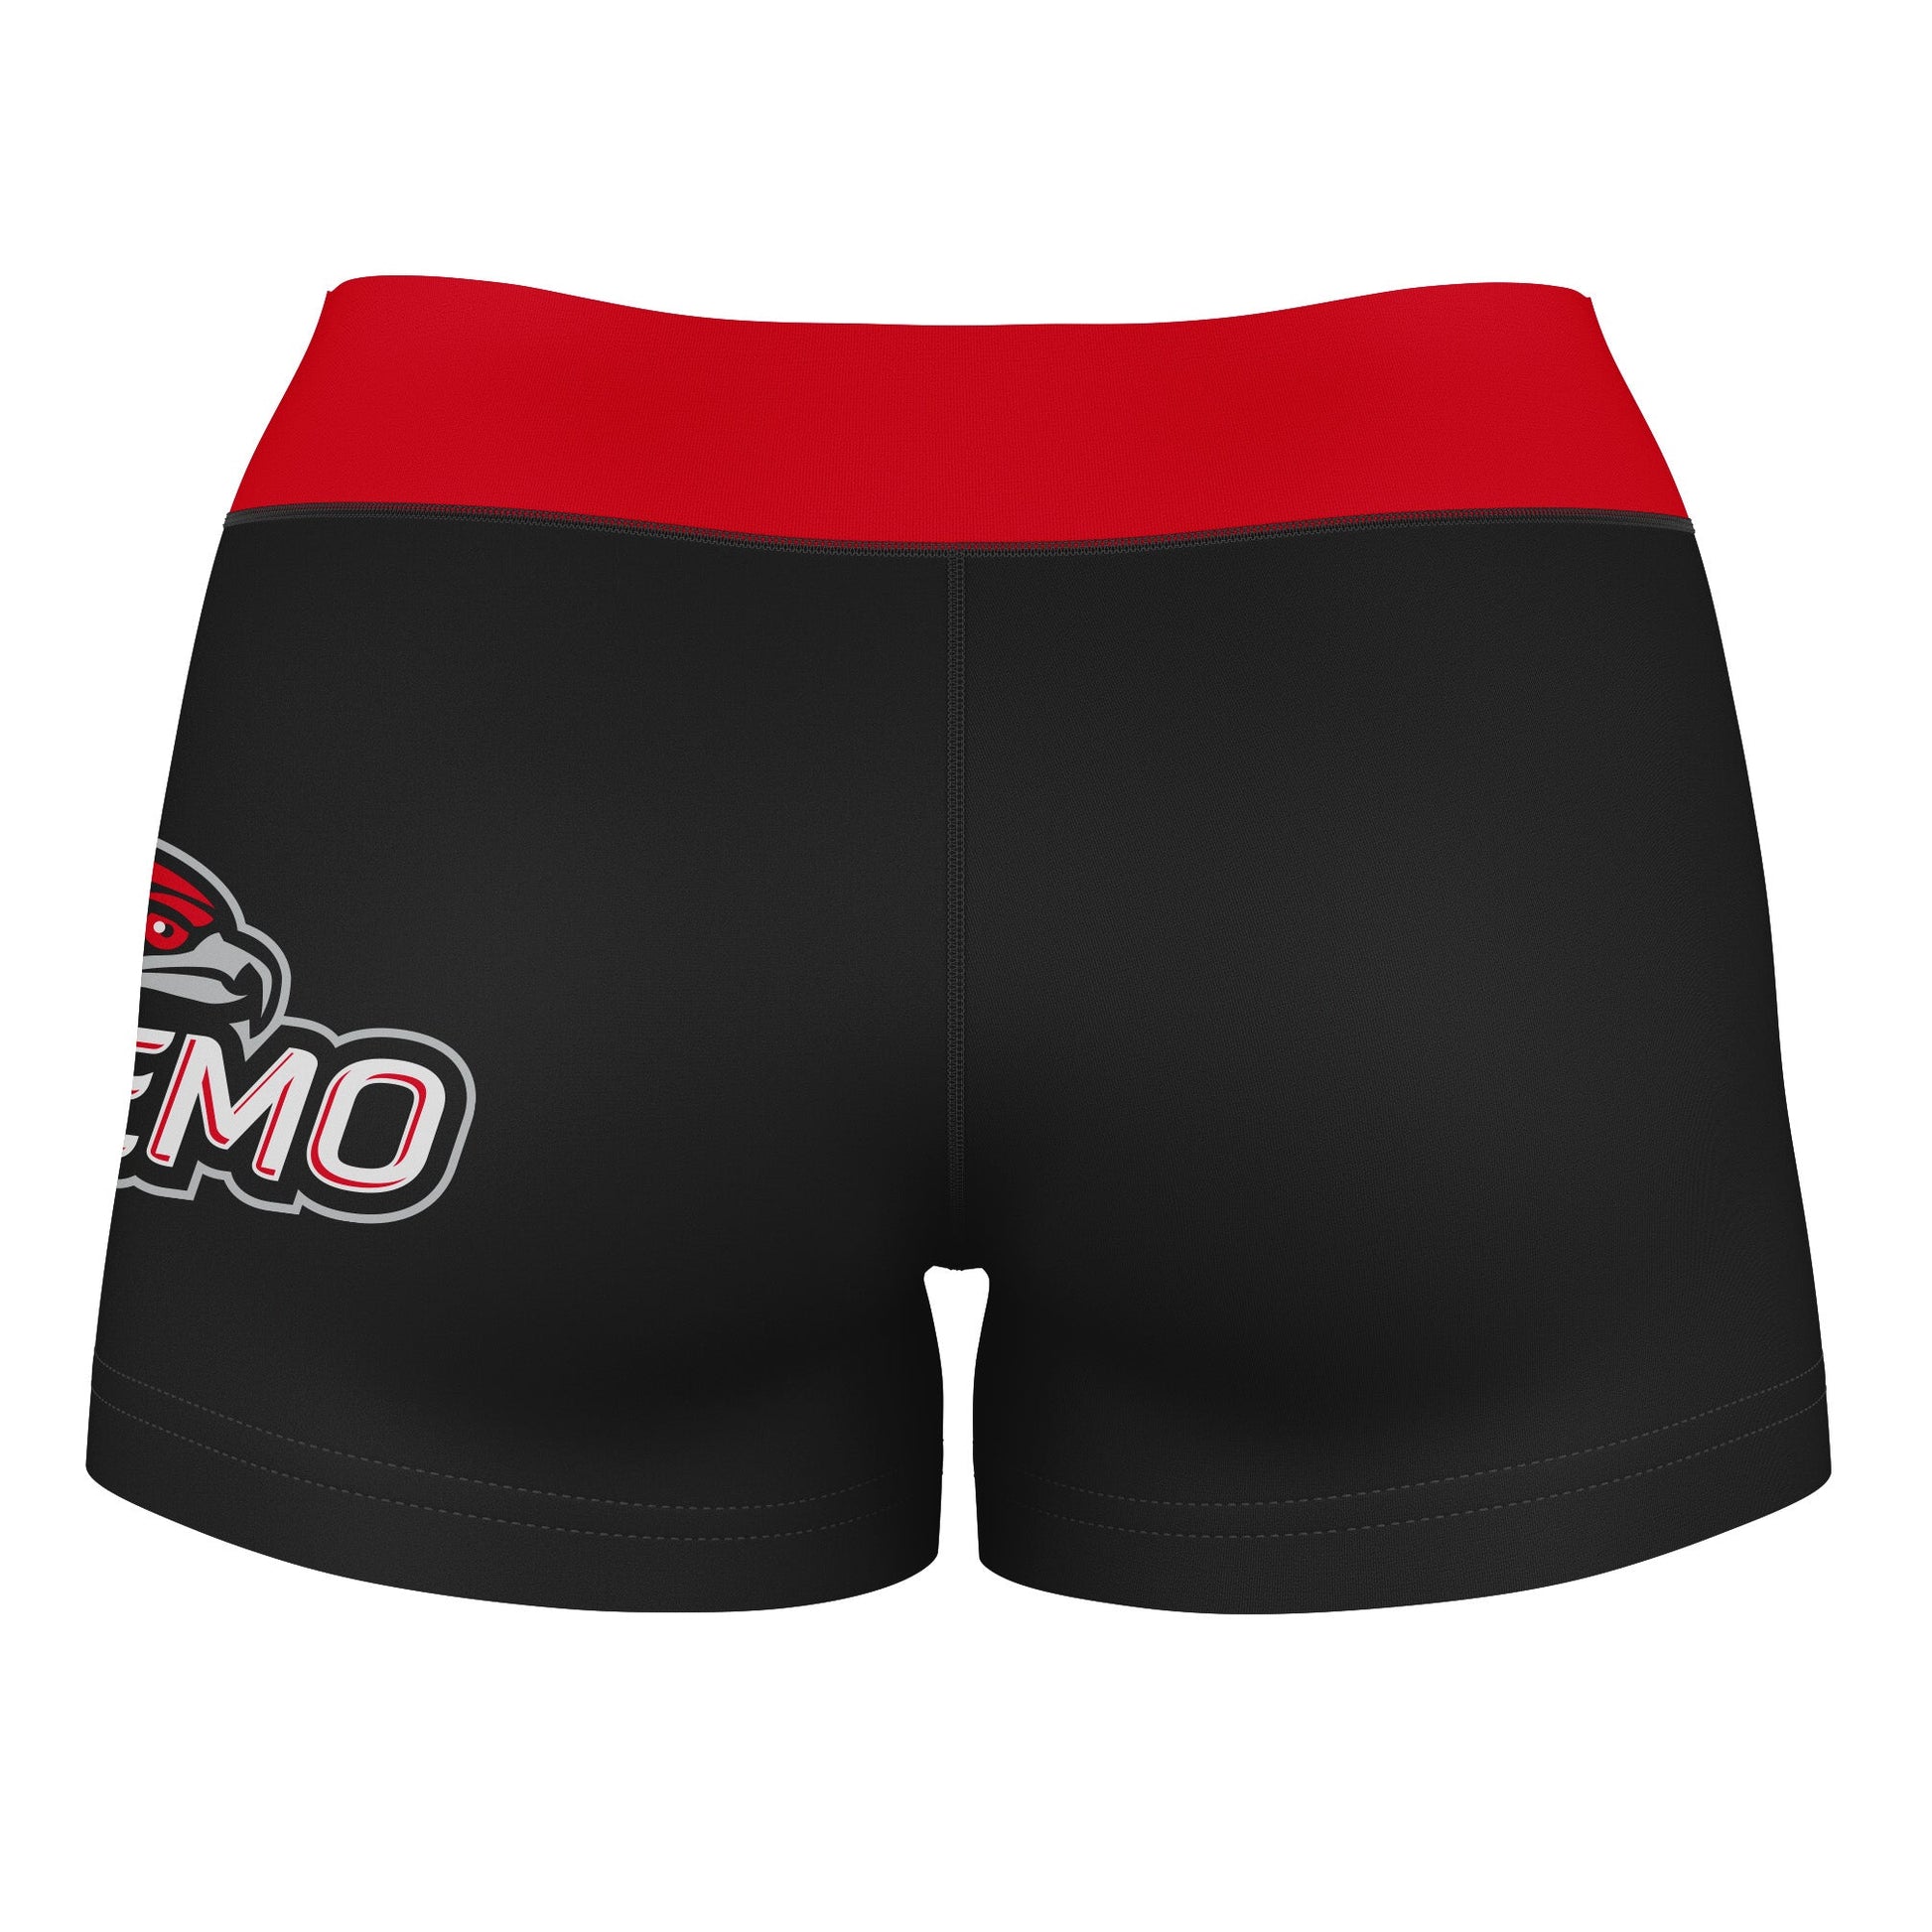 SEMO Redhawks Vive La Fete Game Day Logo on Thigh and Waistband Black & Red Women Yoga Booty Workout Shorts 3.75 Inseam" - Vive La F̻te - Online Apparel Store